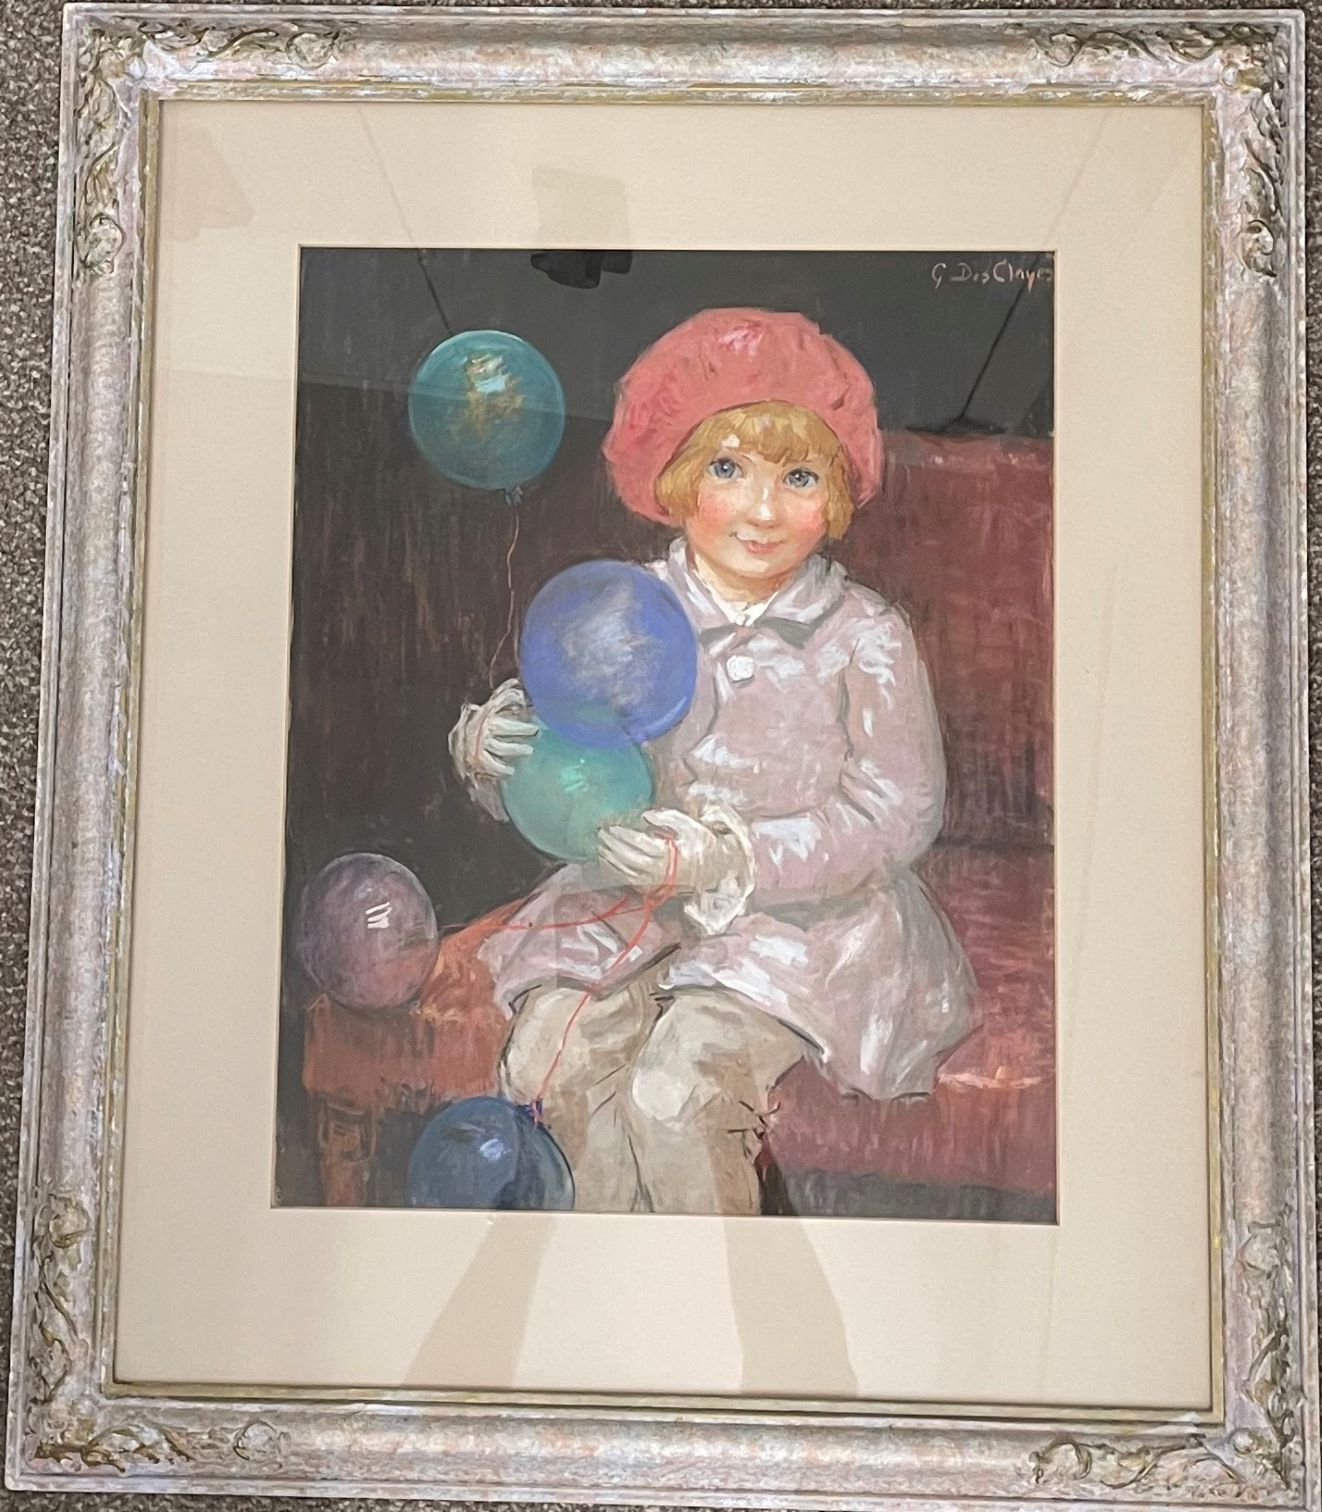 Framed pastel portrait of a young girl with balloons by Gertrude Des Clayes 170cm by 240cm - Image 2 of 2